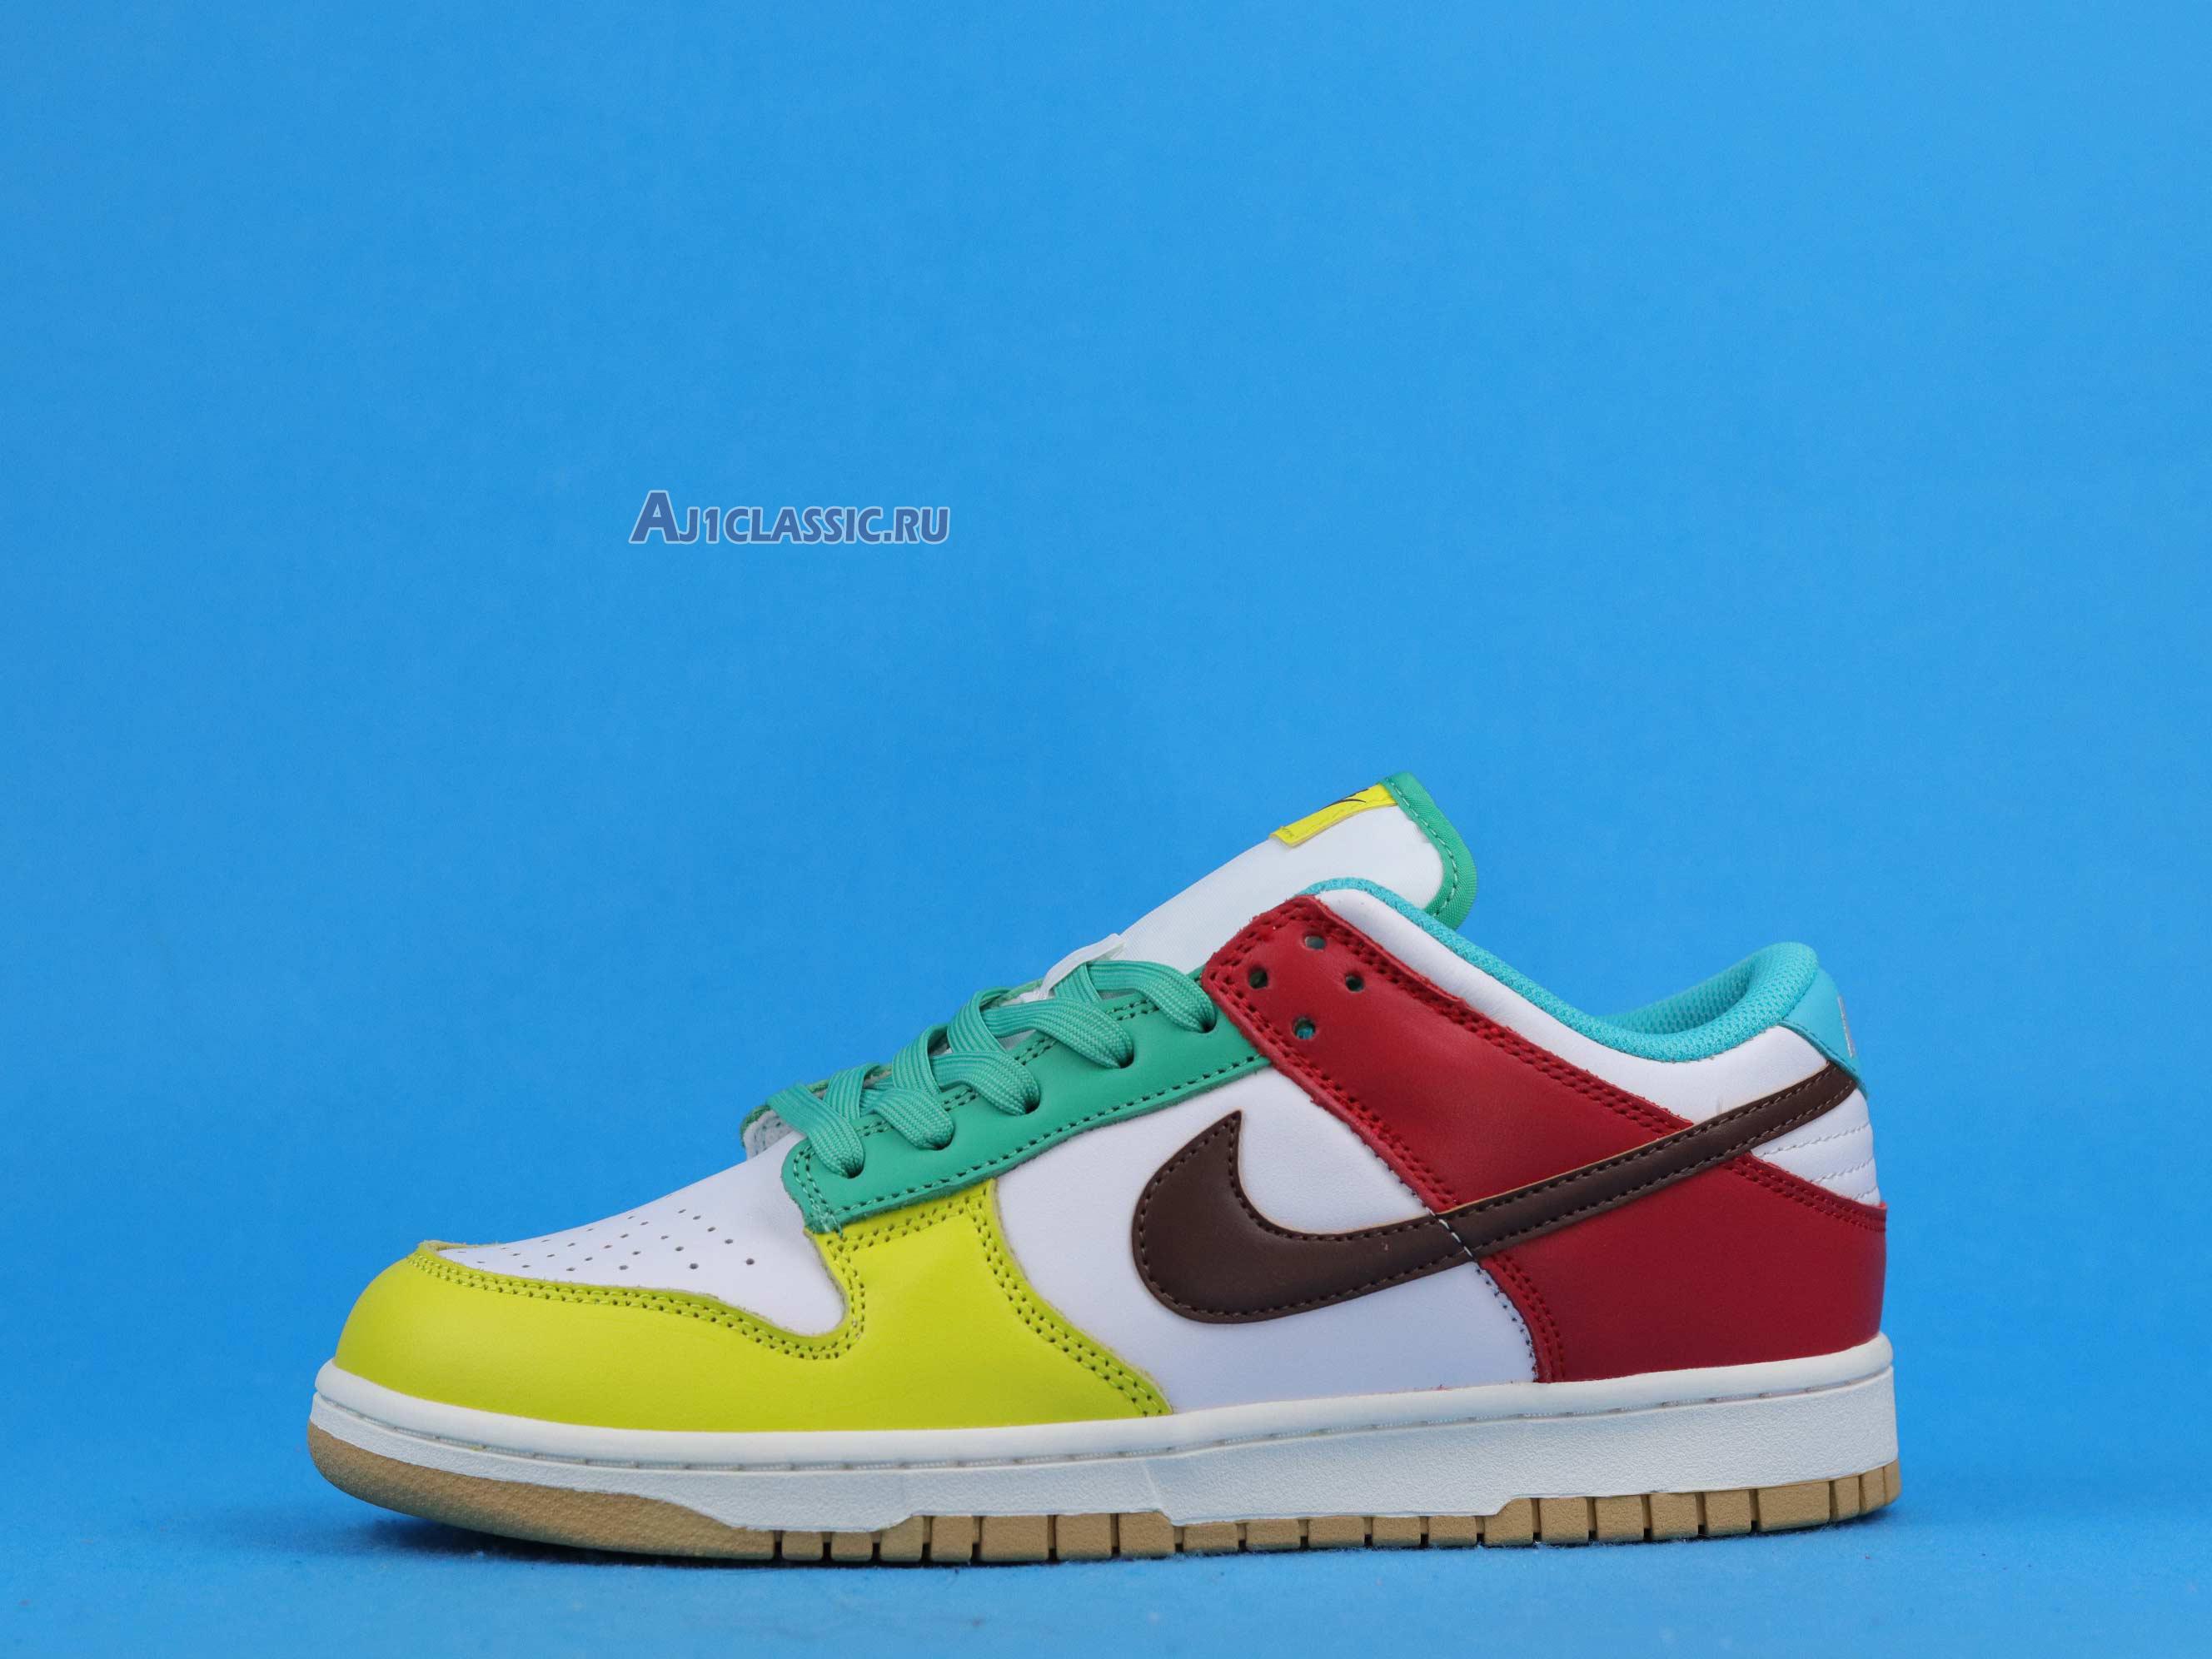 Nike Dunk Low White Free 99 DH0952-100-2 White/Light Chocolate-Roma Green Sneakers